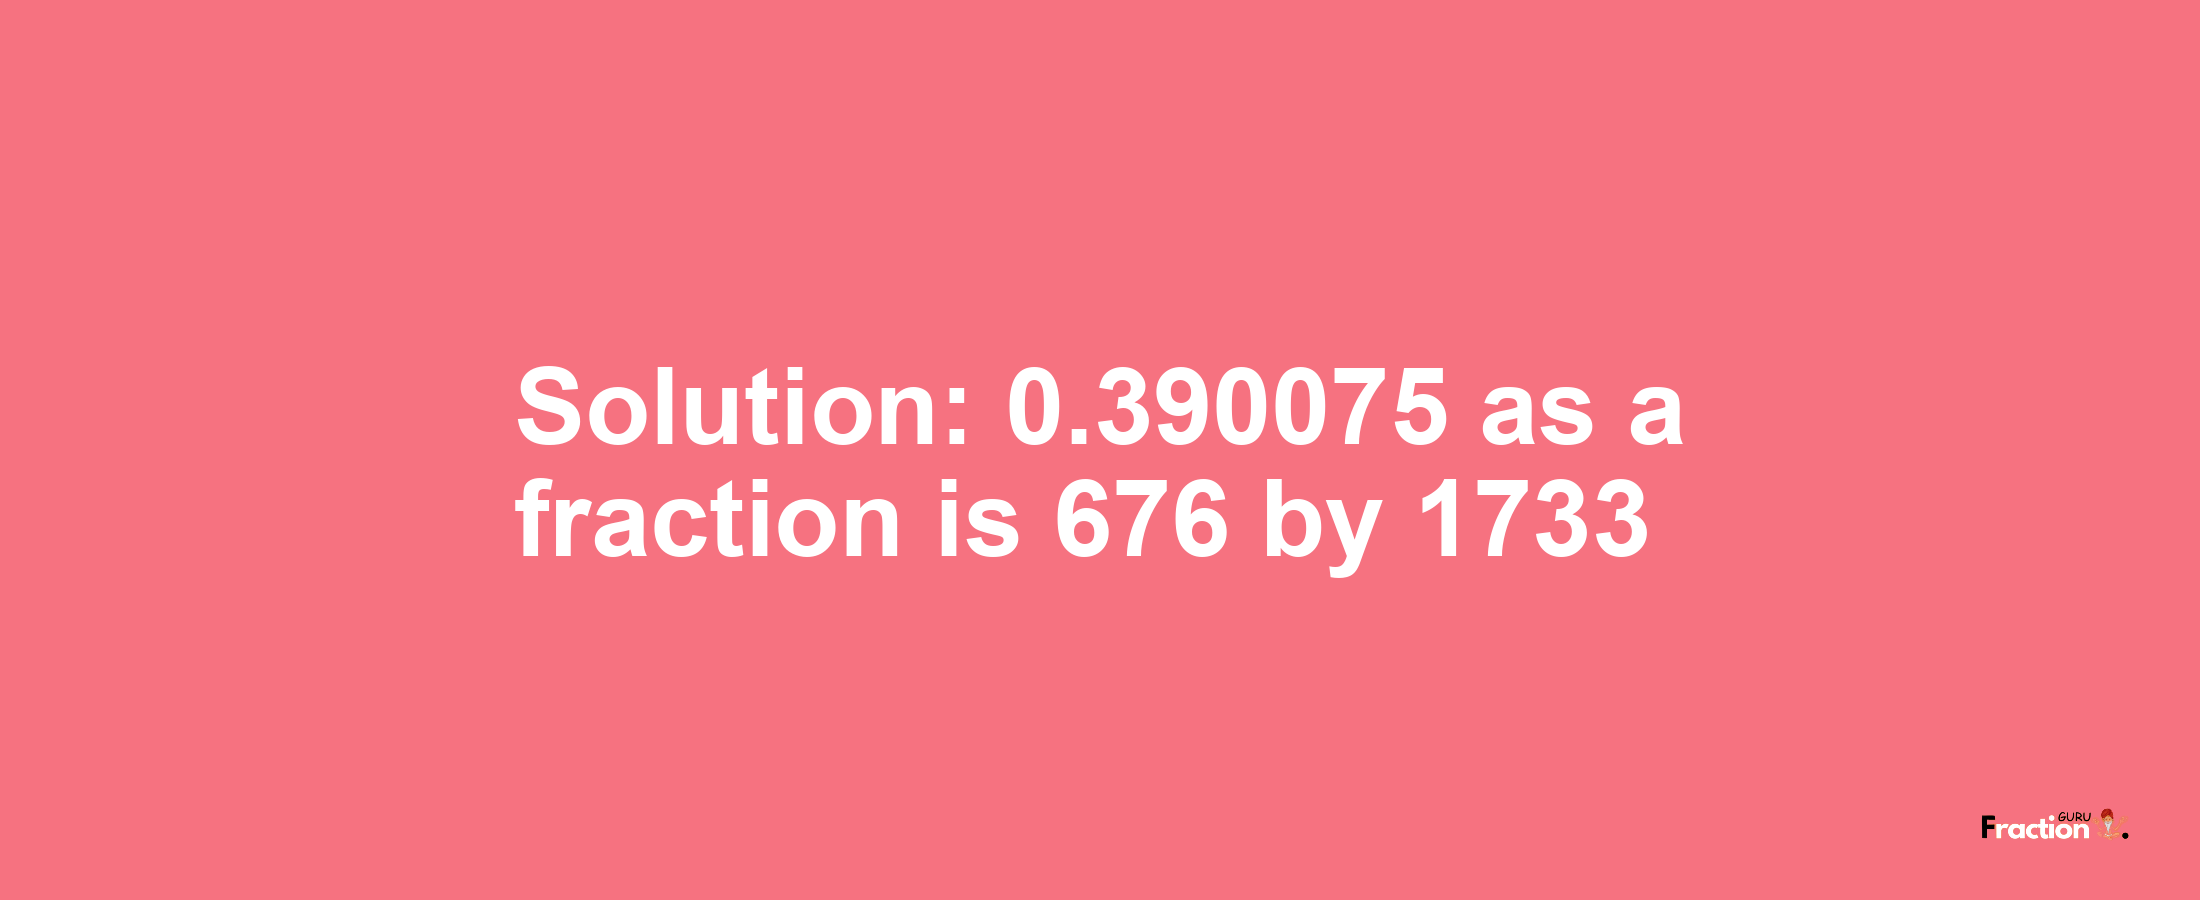 Solution:0.390075 as a fraction is 676/1733